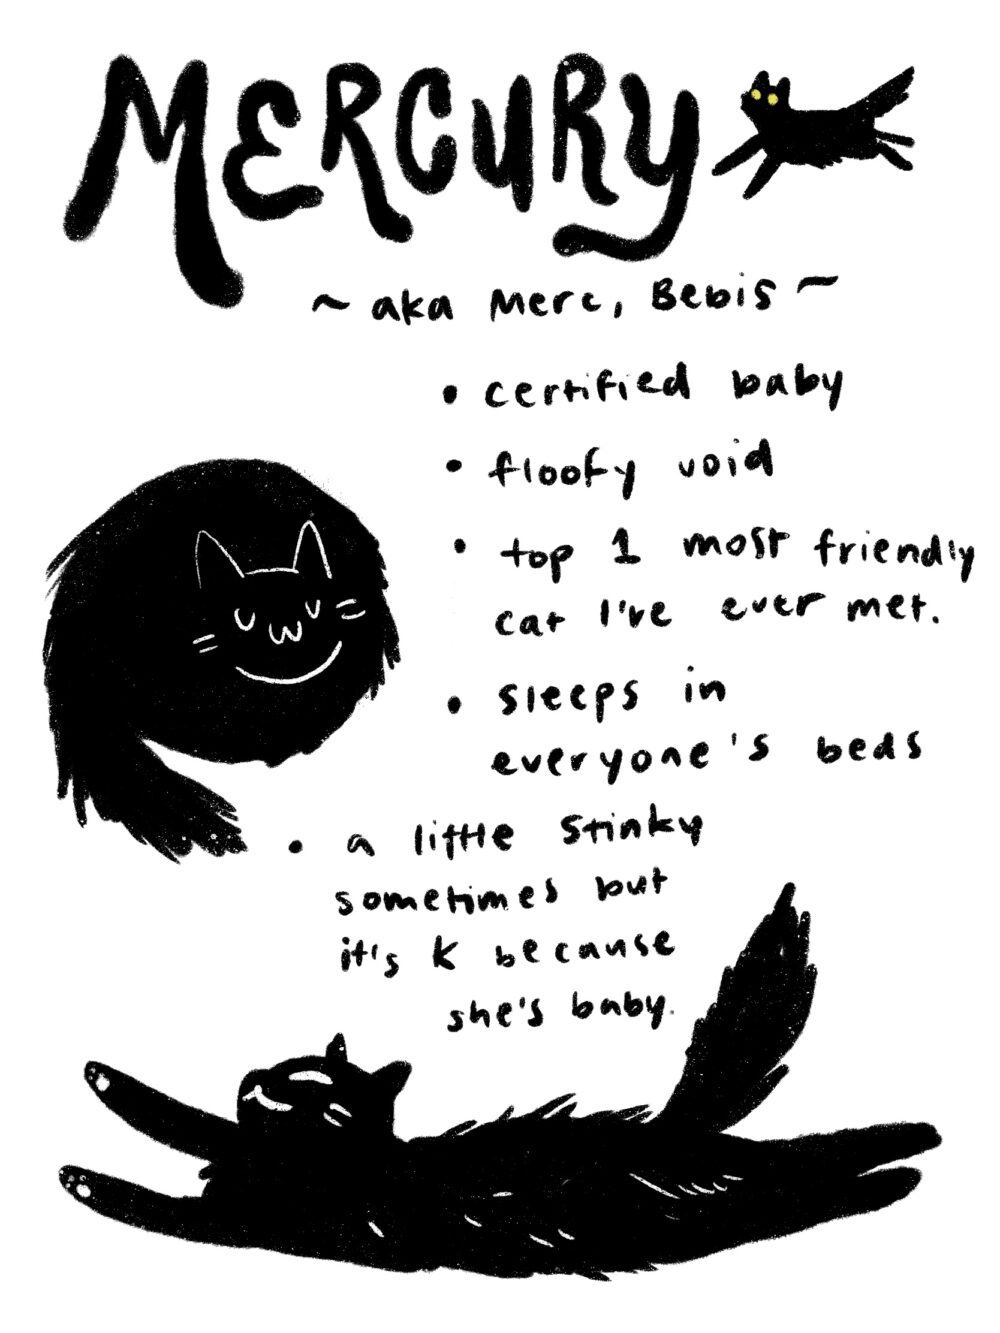 mercury. aka merc, bebis. certified baby. floofy void. top 1 most friendly cat i've ever meet. sleeps in everyone's beds. a little stinky sometimes but it's k because she's baby